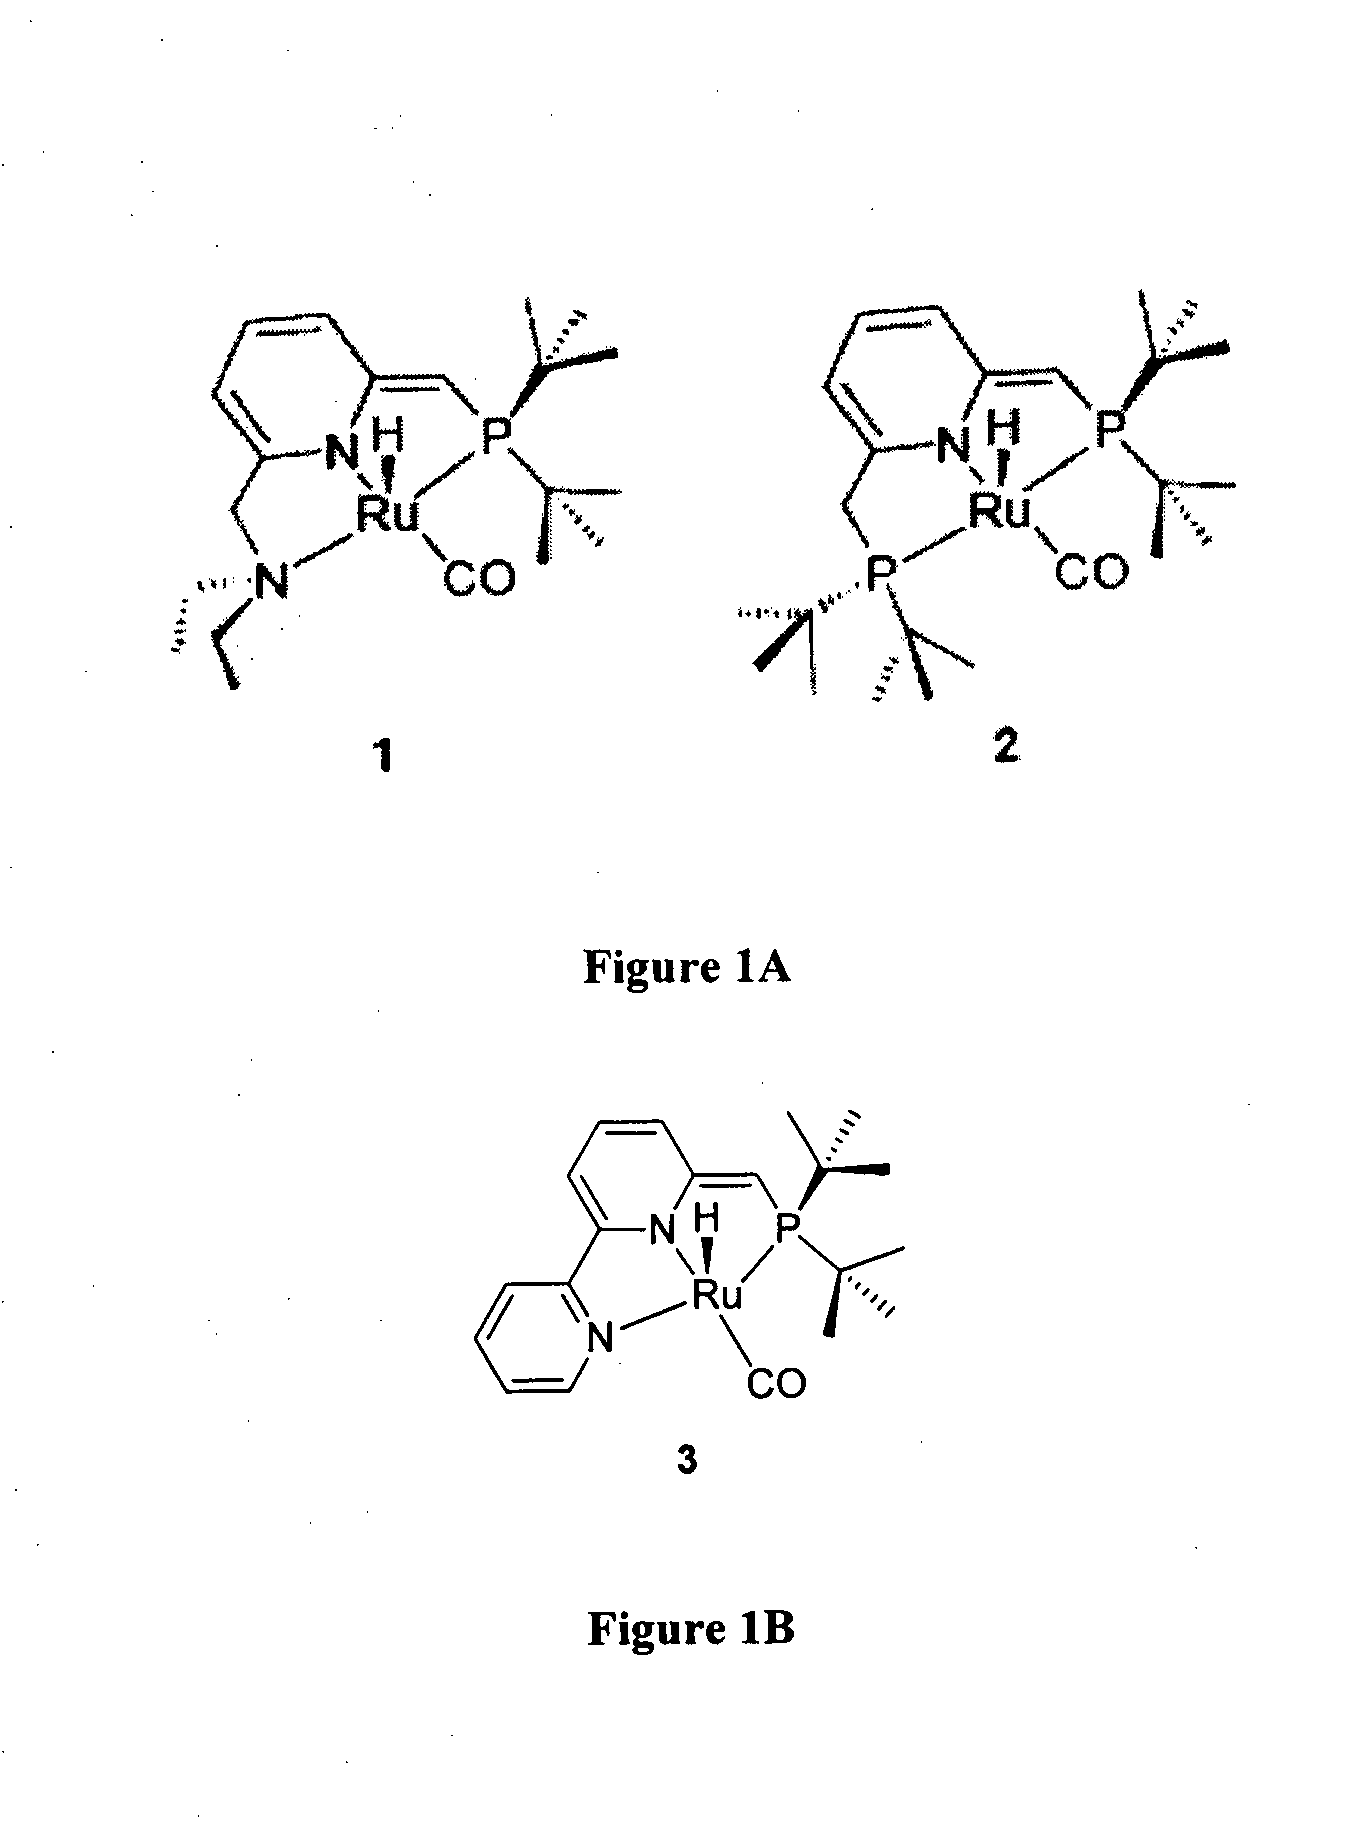 Novel ruthenium complexes and their uses in processes for formation and/or hydrogenation of esters, amides and derivatives thereof